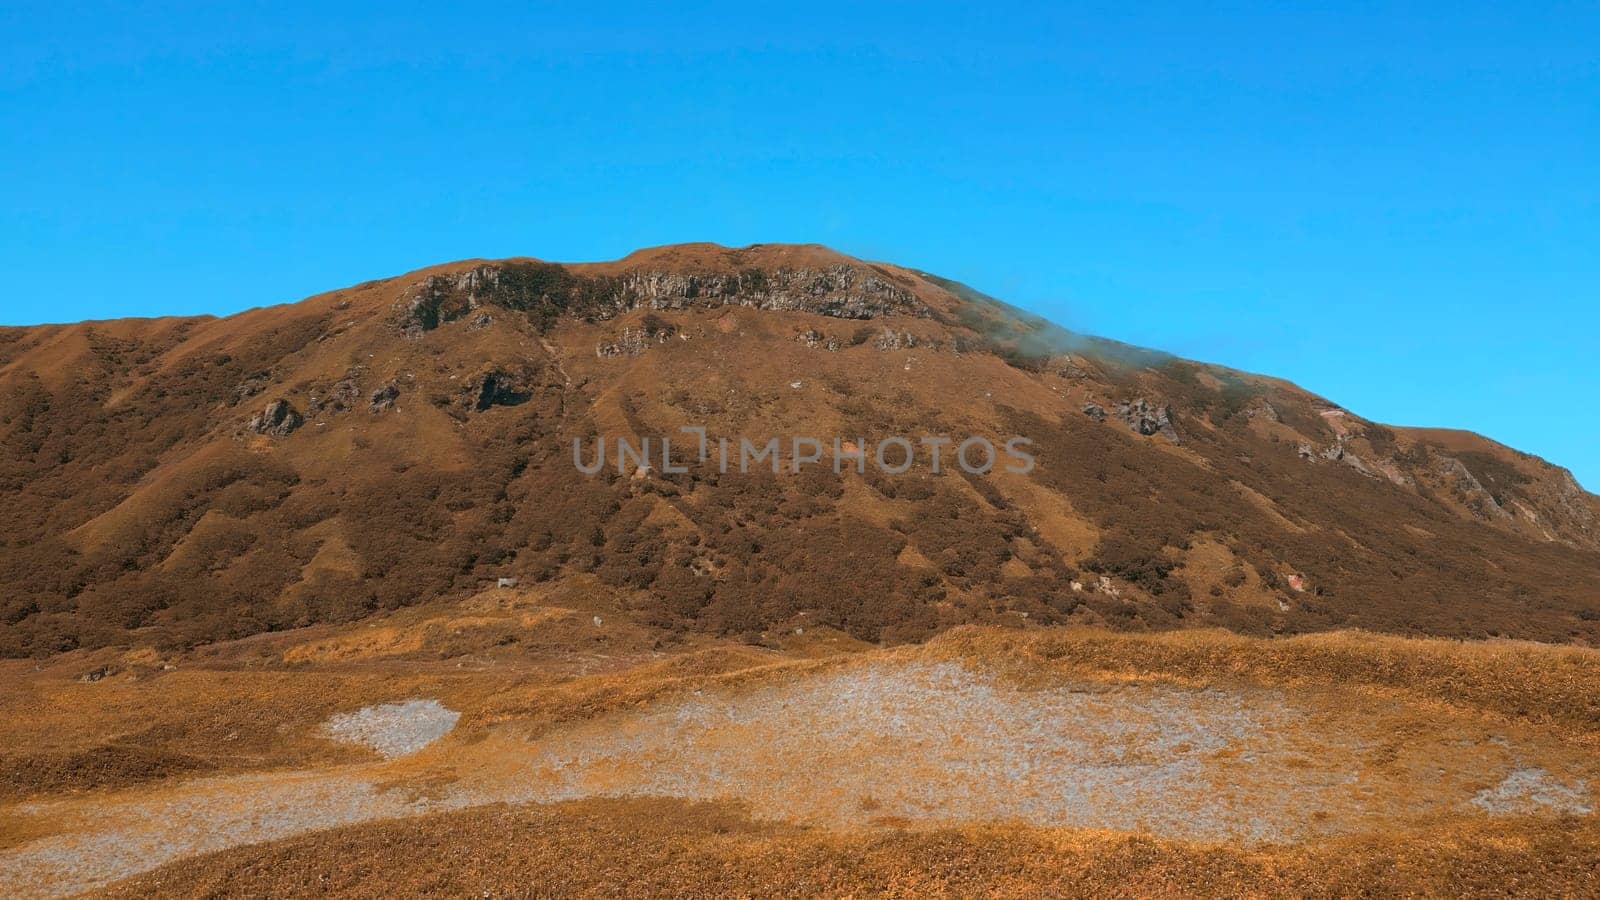 Colorful autumn vegetation in a mountainous area. Clip. A sunny day, blue sky and golden hills